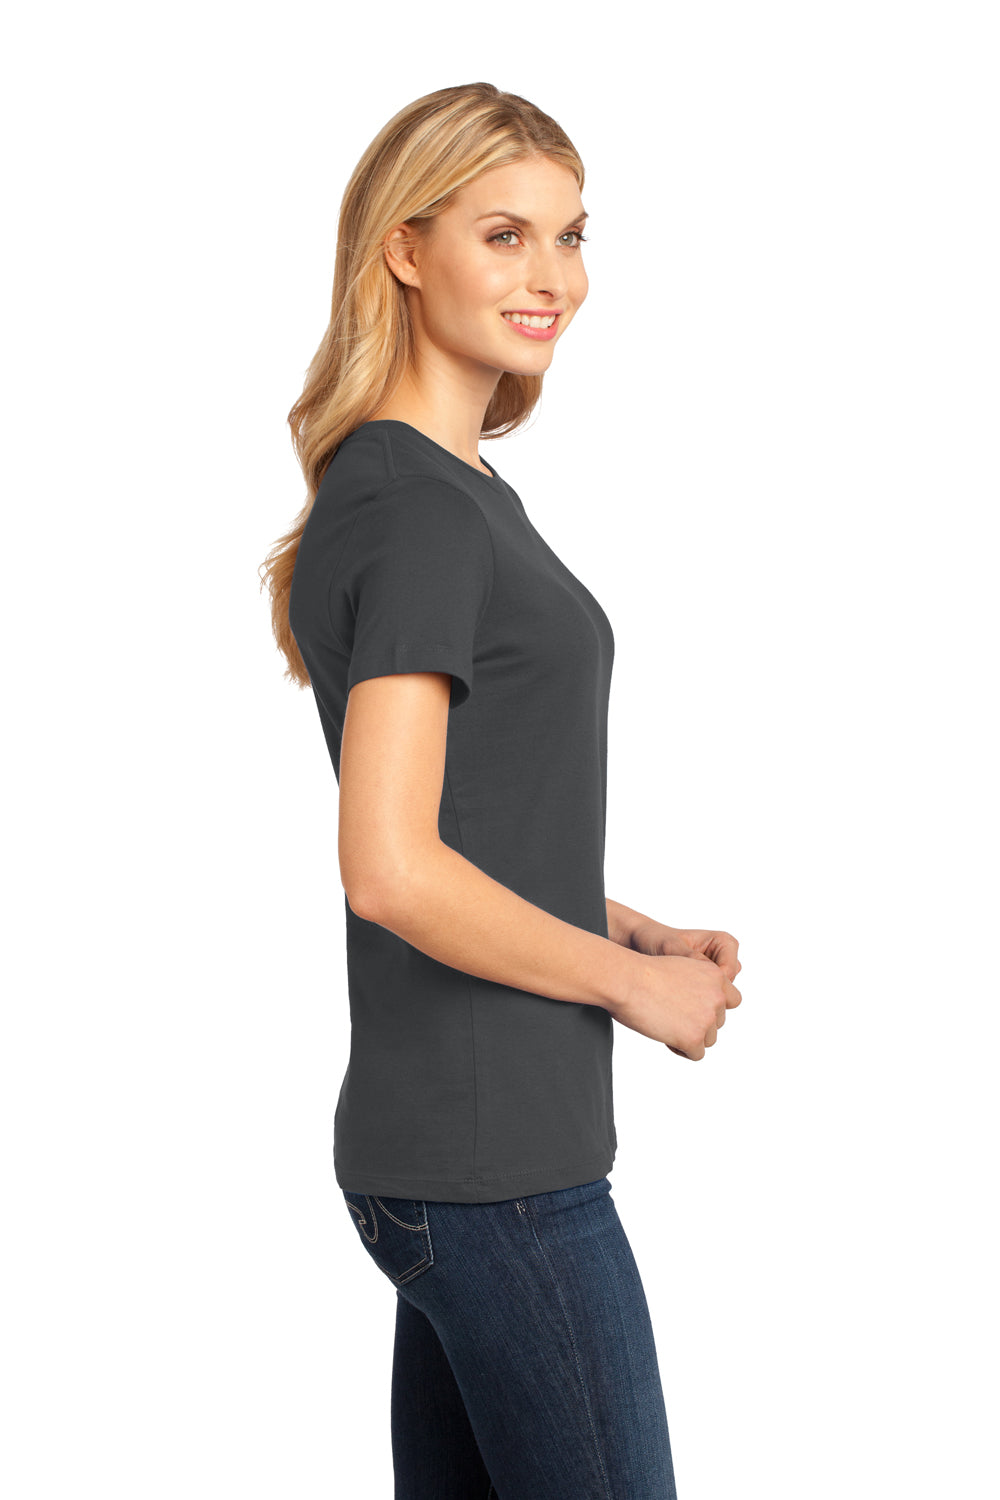 District DM104L Womens Perfect Weight Short Sleeve Crewneck T-Shirt Charcoal Grey Side